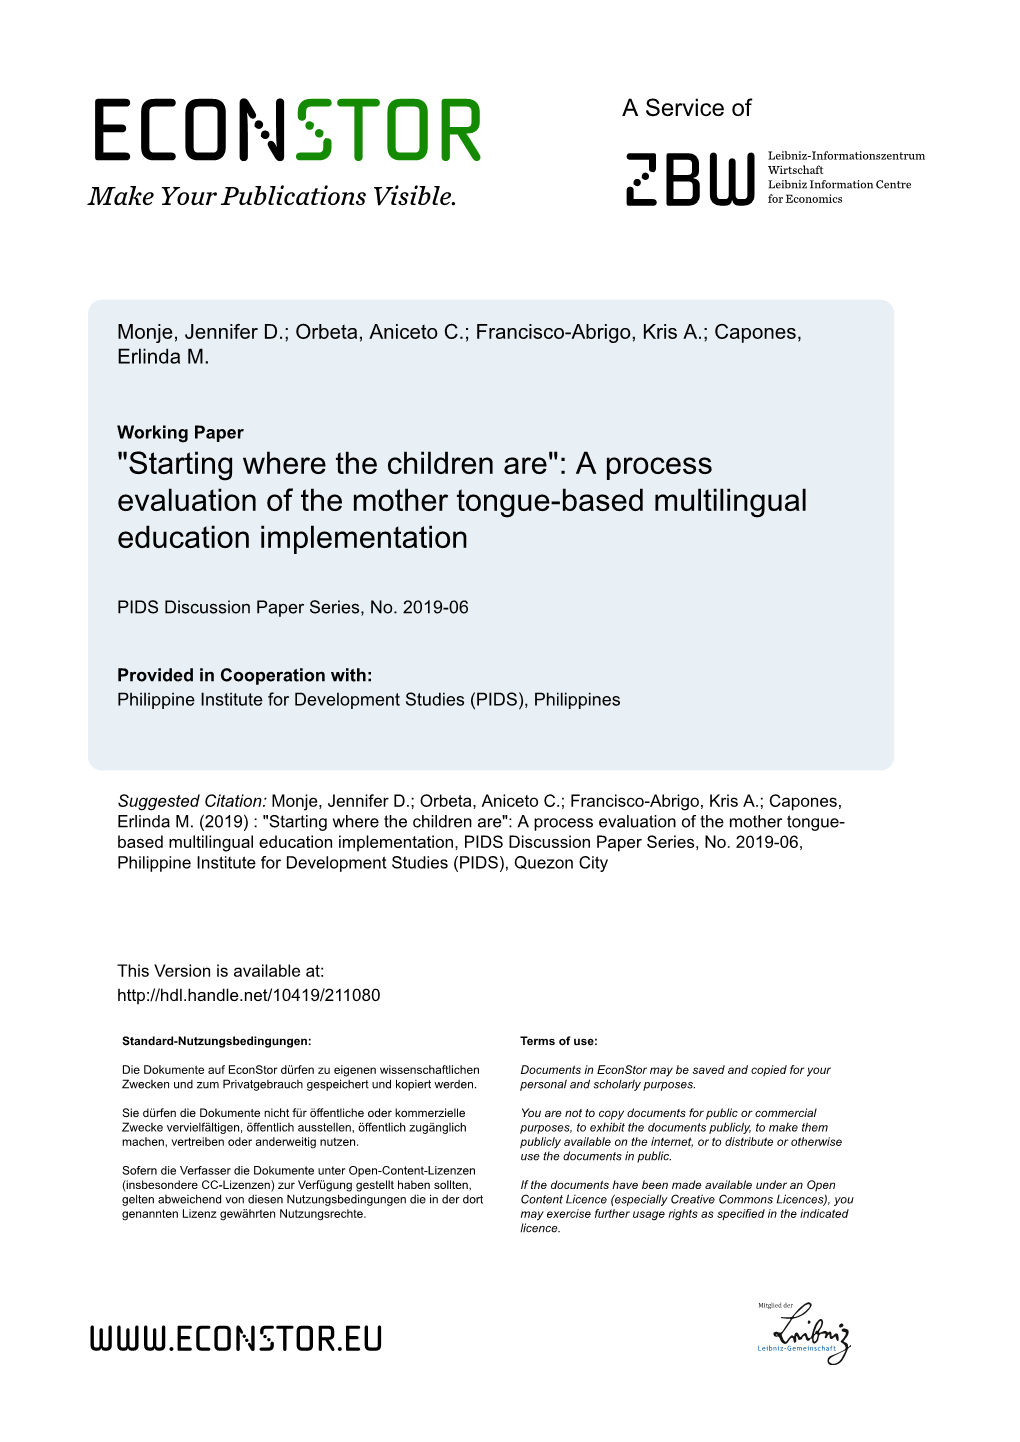 "Starting Where the Children Are": a Process Evaluation of the Mother Tongue-Based Multilingual Education Implementation